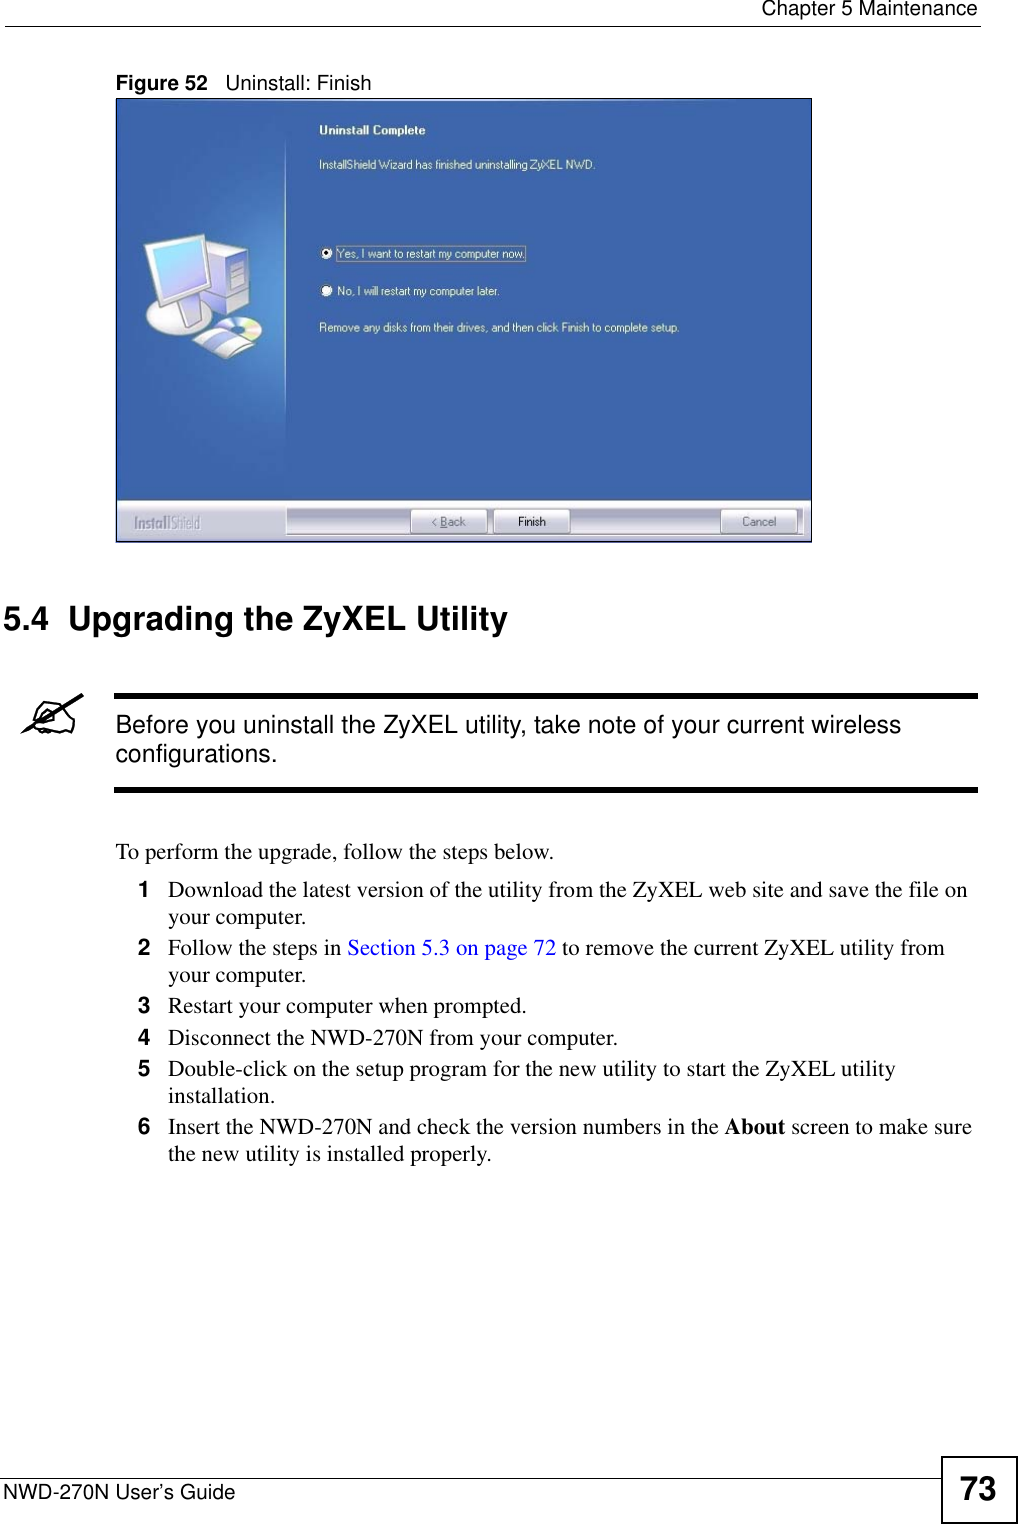  Chapter 5 MaintenanceNWD-270N User’s Guide 73Figure 52   Uninstall: Finish 5.4  Upgrading the ZyXEL Utility&quot;Before you uninstall the ZyXEL utility, take note of your current wireless configurations.To perform the upgrade, follow the steps below.1Download the latest version of the utility from the ZyXEL web site and save the file on your computer.2Follow the steps in Section 5.3 on page 72 to remove the current ZyXEL utility from your computer.3Restart your computer when prompted.4Disconnect the NWD-270N from your computer.5Double-click on the setup program for the new utility to start the ZyXEL utility installation.6Insert the NWD-270N and check the version numbers in the About screen to make sure the new utility is installed properly.